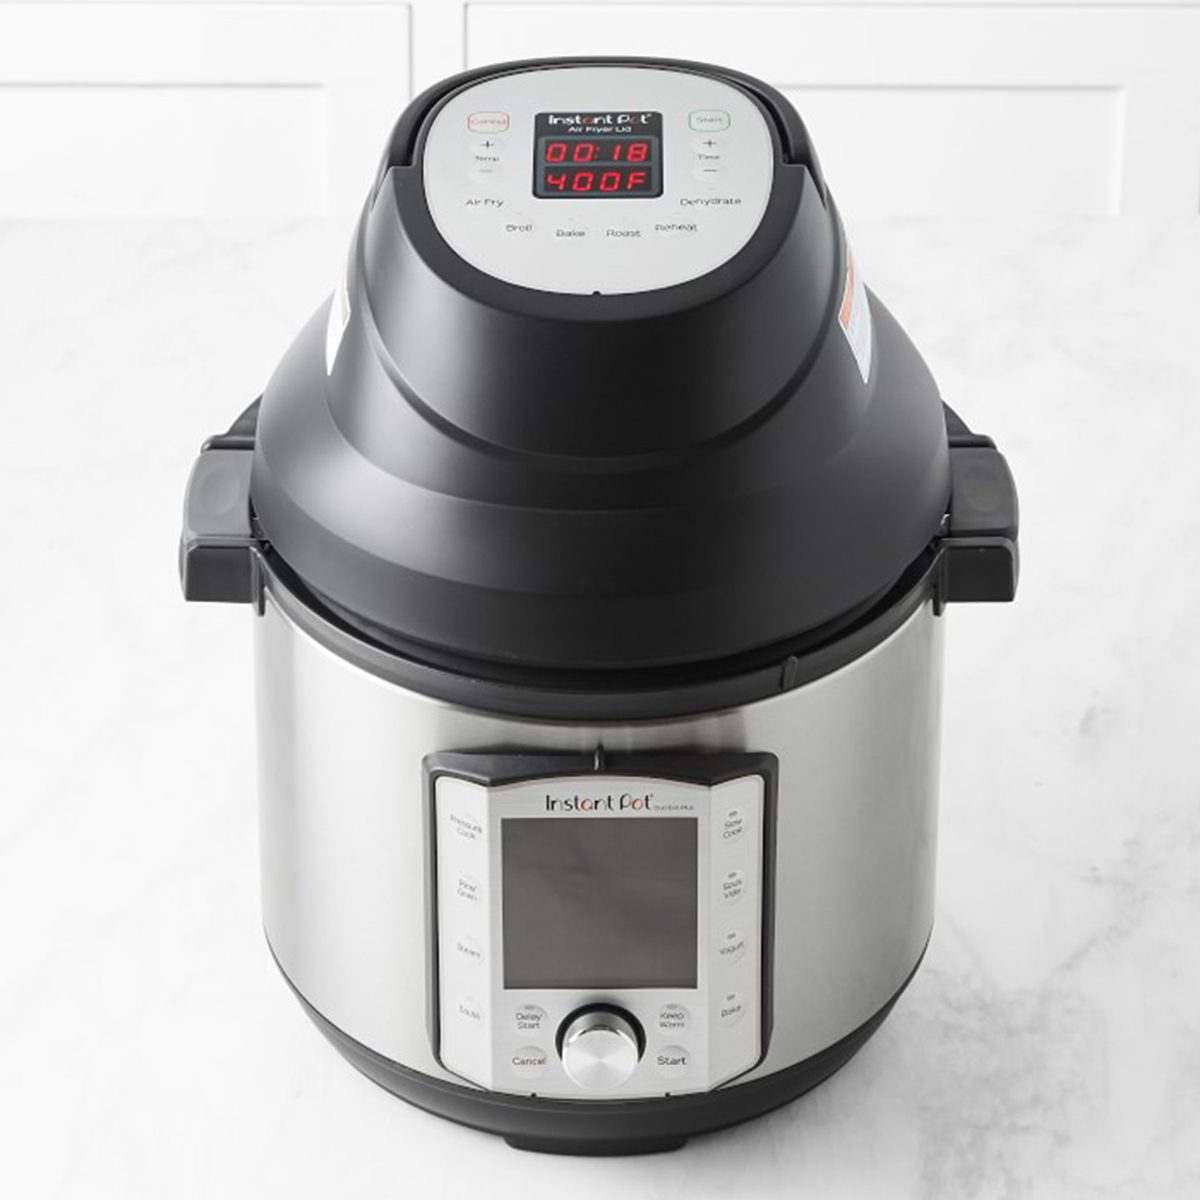 ONLY Instant Pot Accessories You Need on